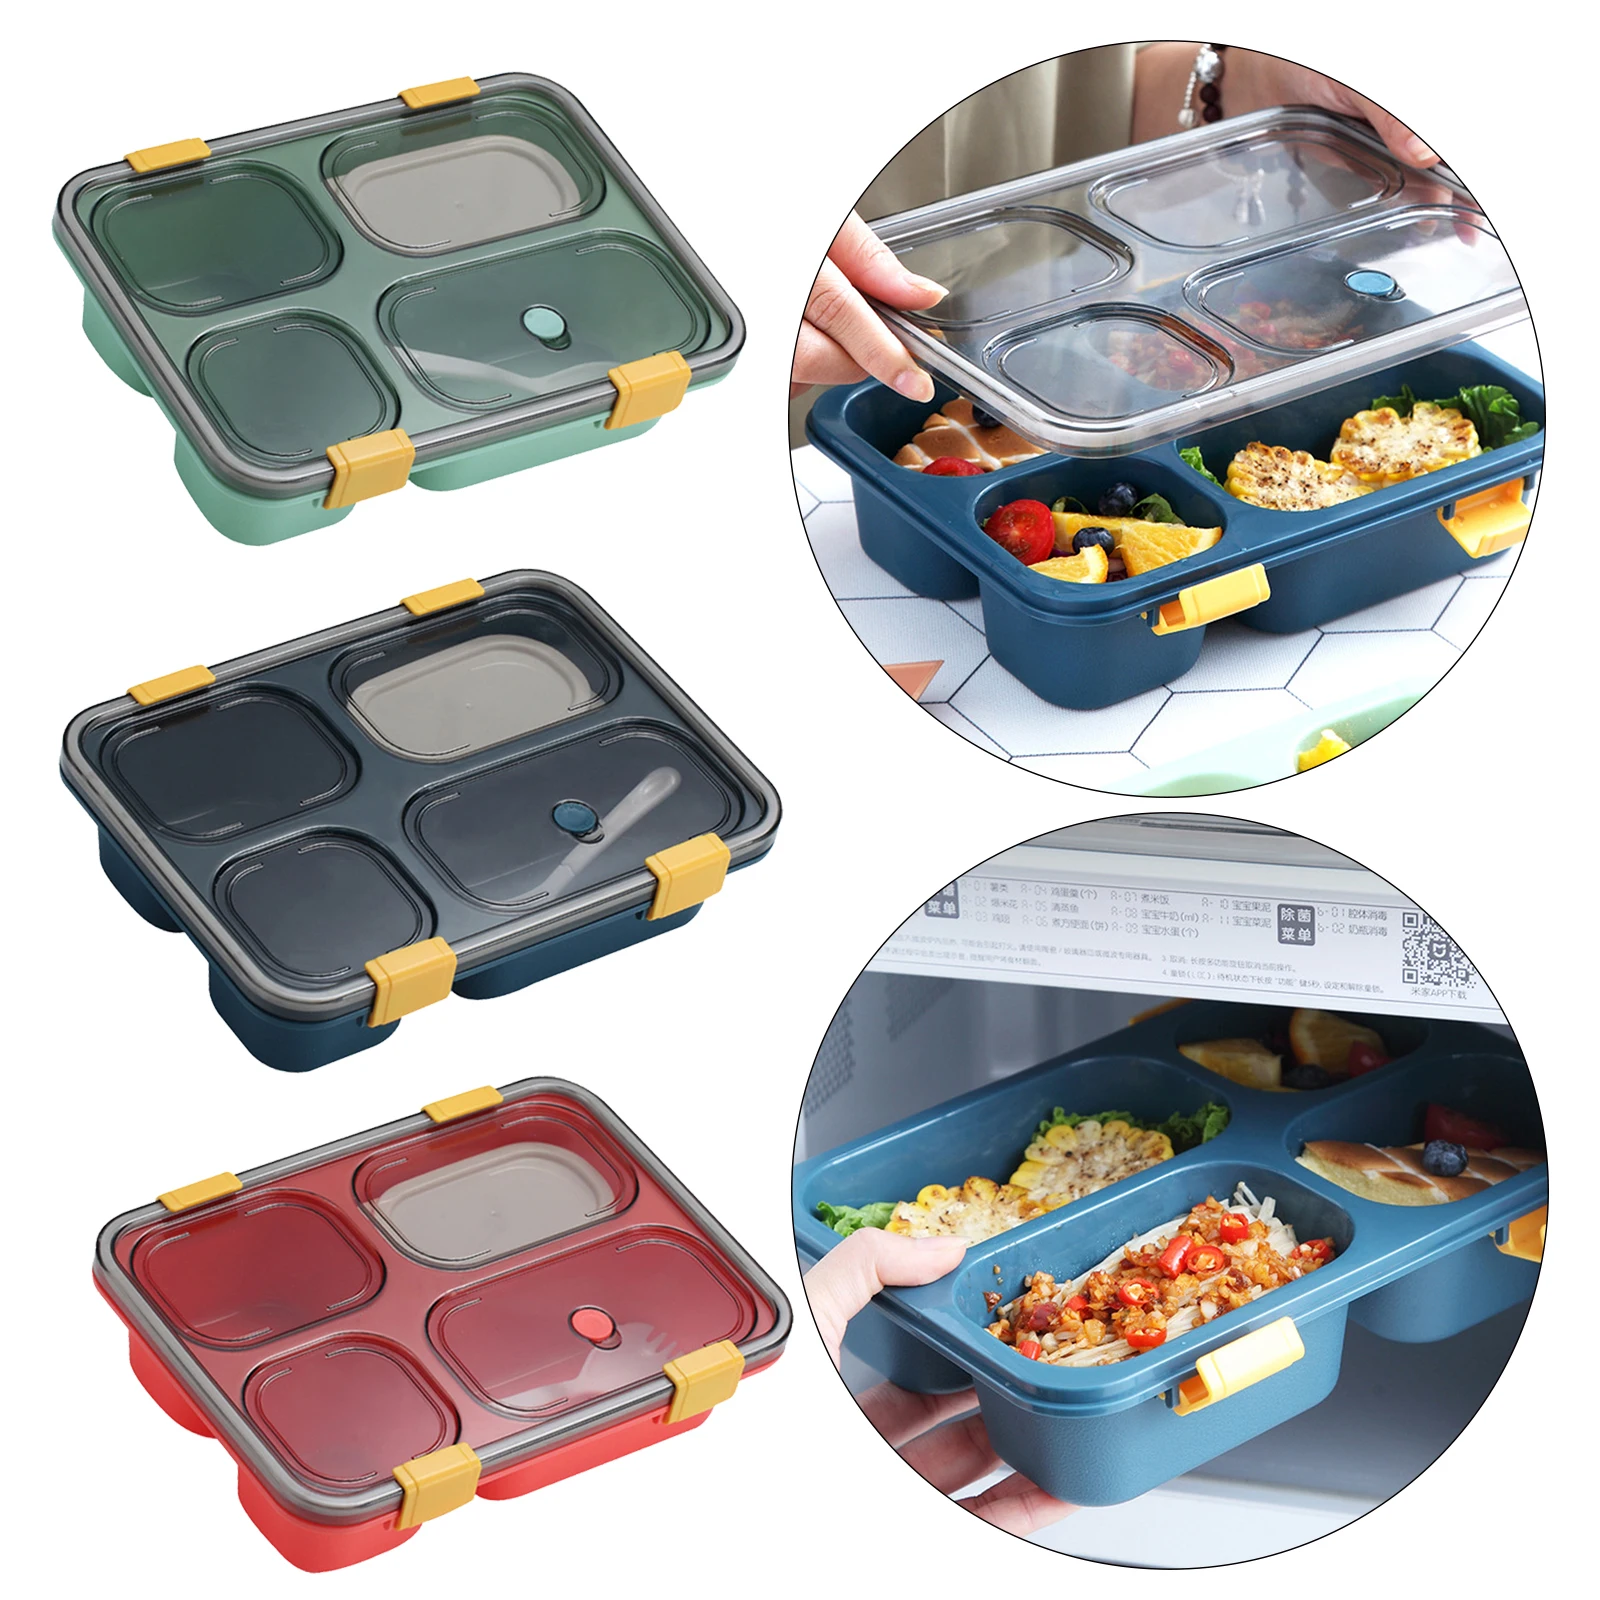 Lunch Boxes Reusable Kitchenware Microwave / Freezer / Dishwasher 